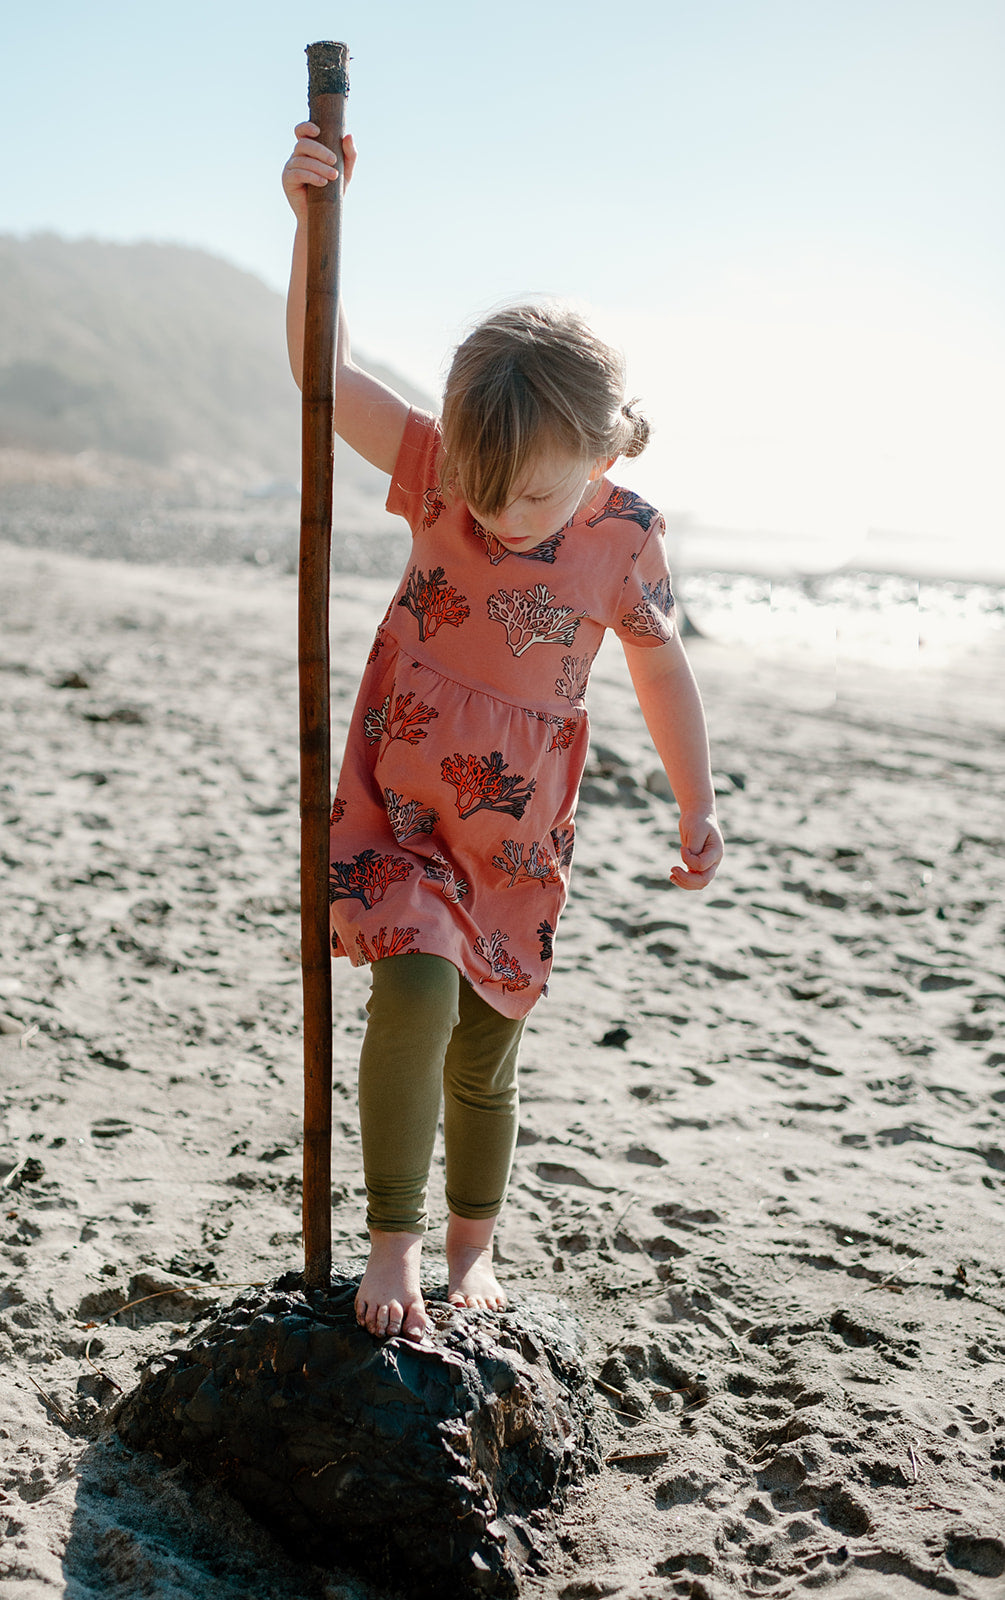 A young girl on the beach wearing this coral dress, standing with driftwood